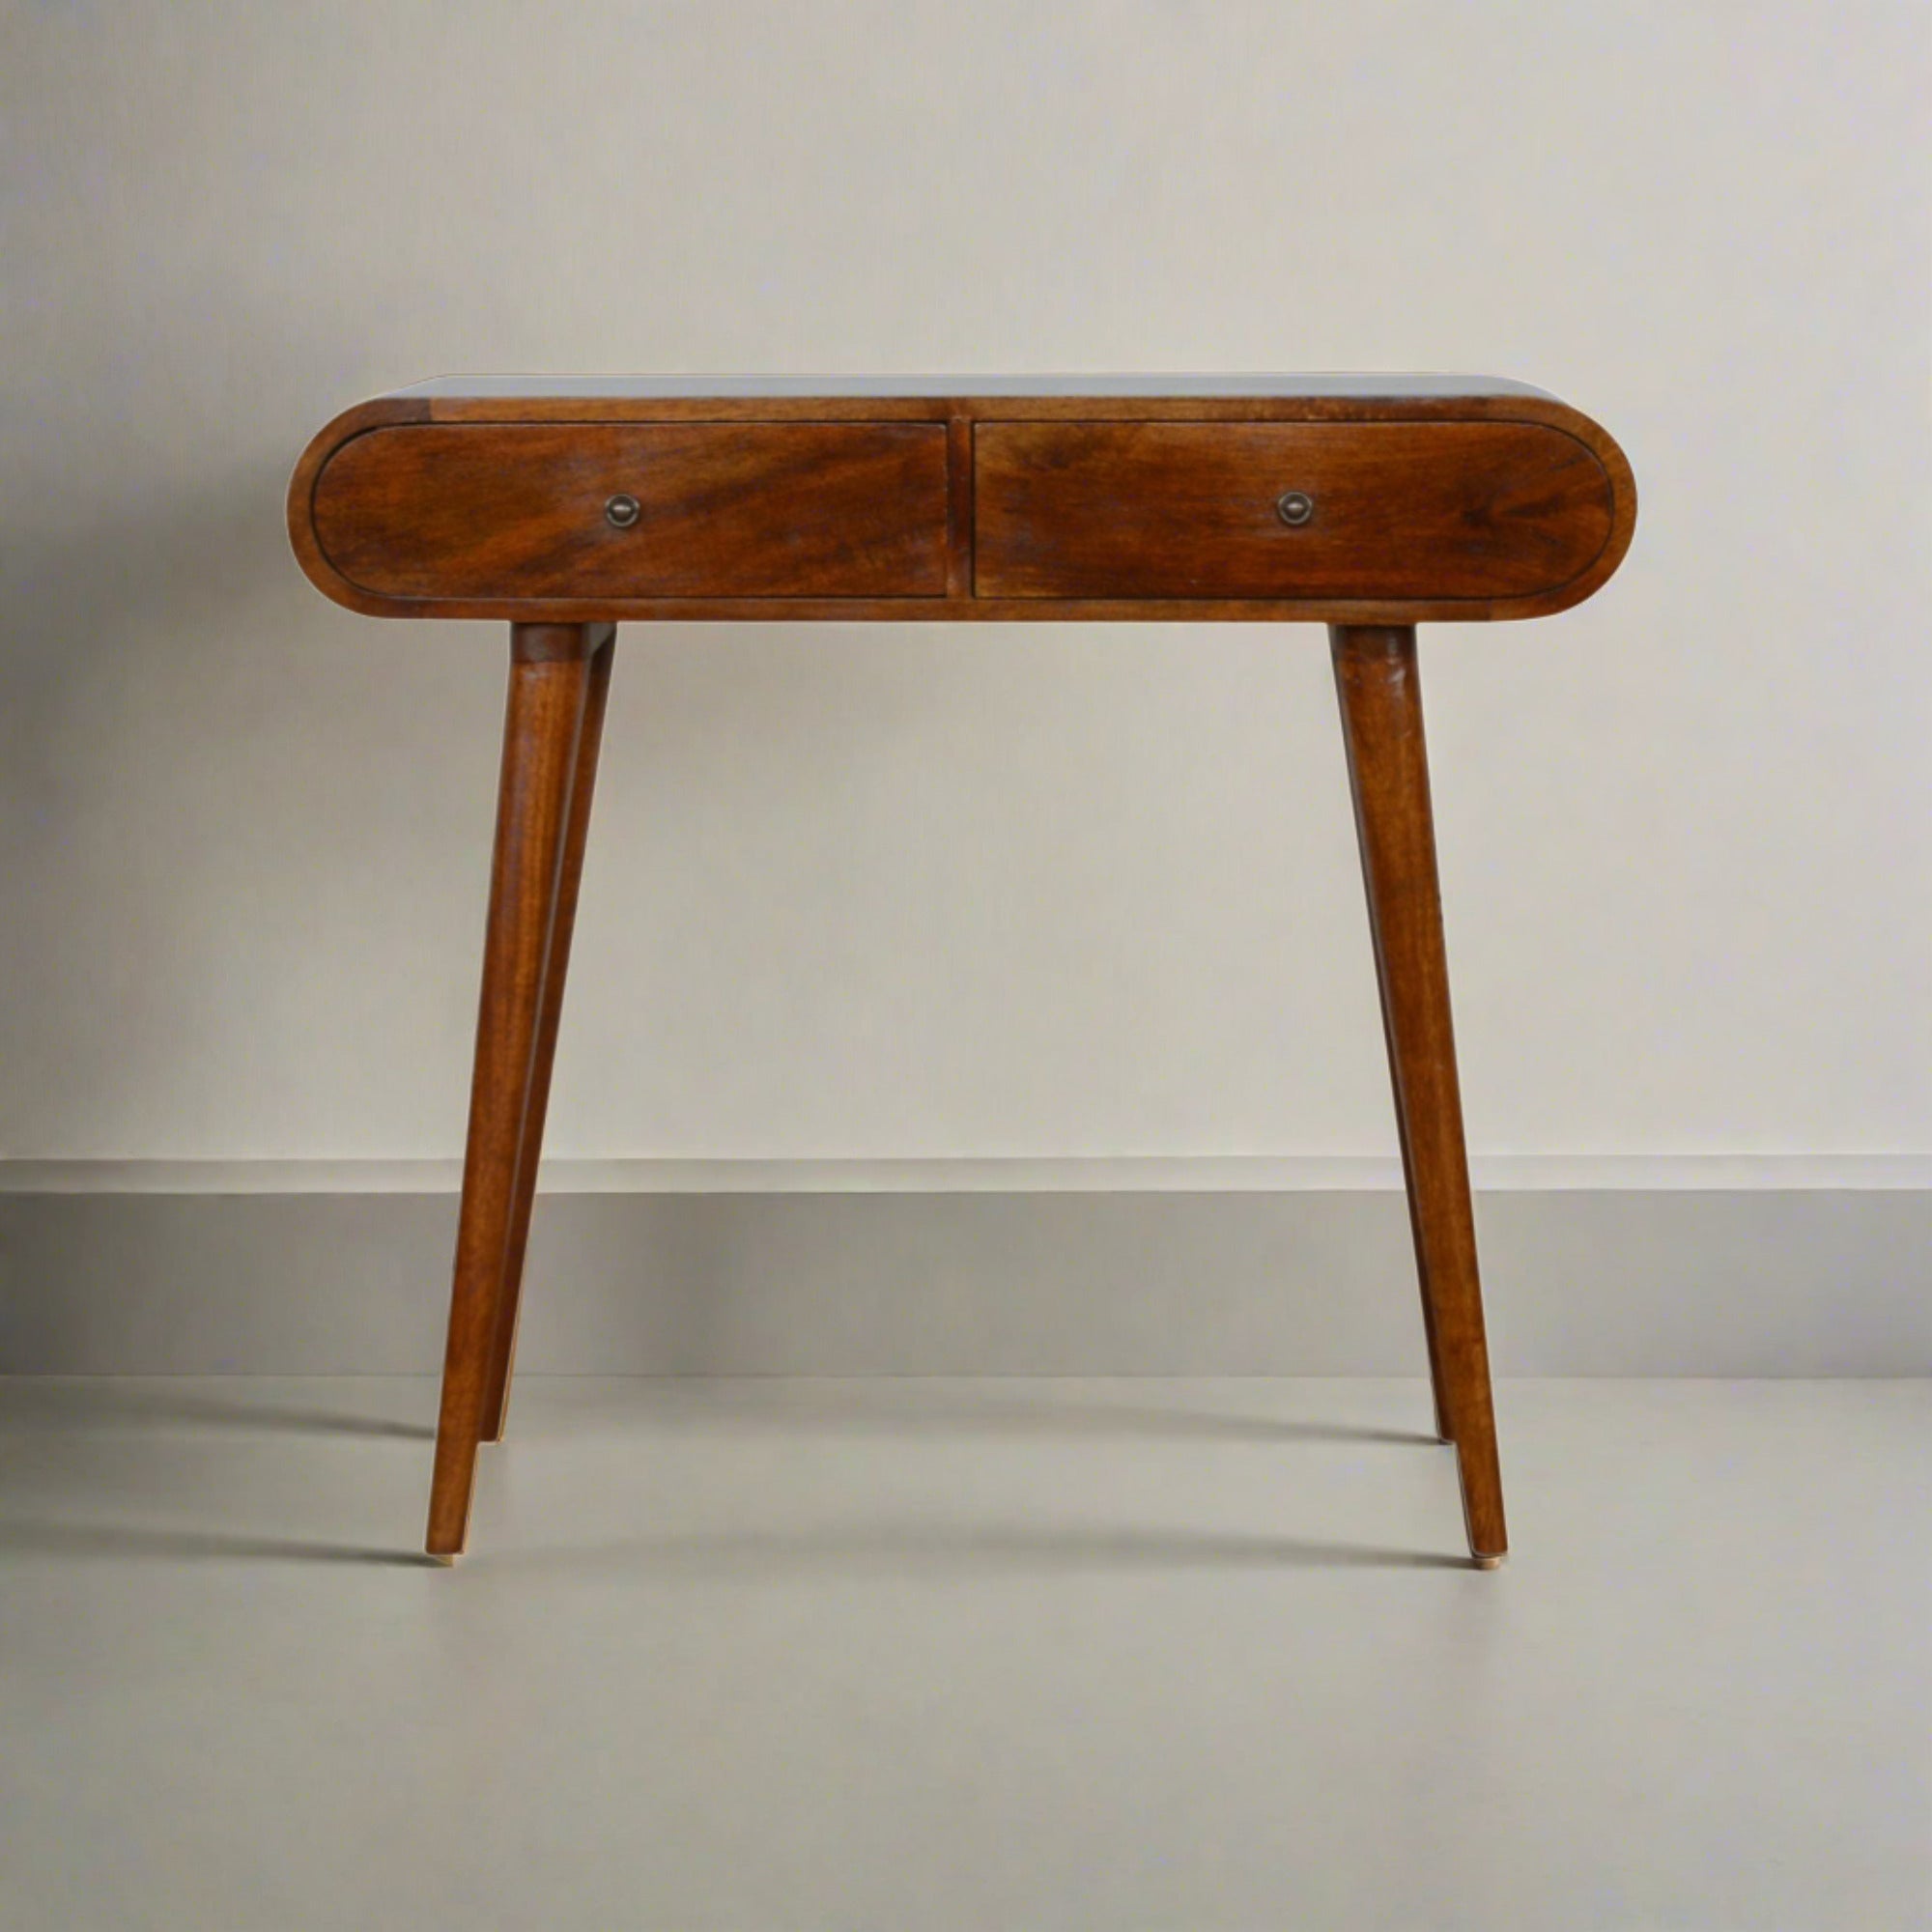 Newton handmade solid wood console table with drawers and curved edges in a deep chestnut finish | malletandplane.com